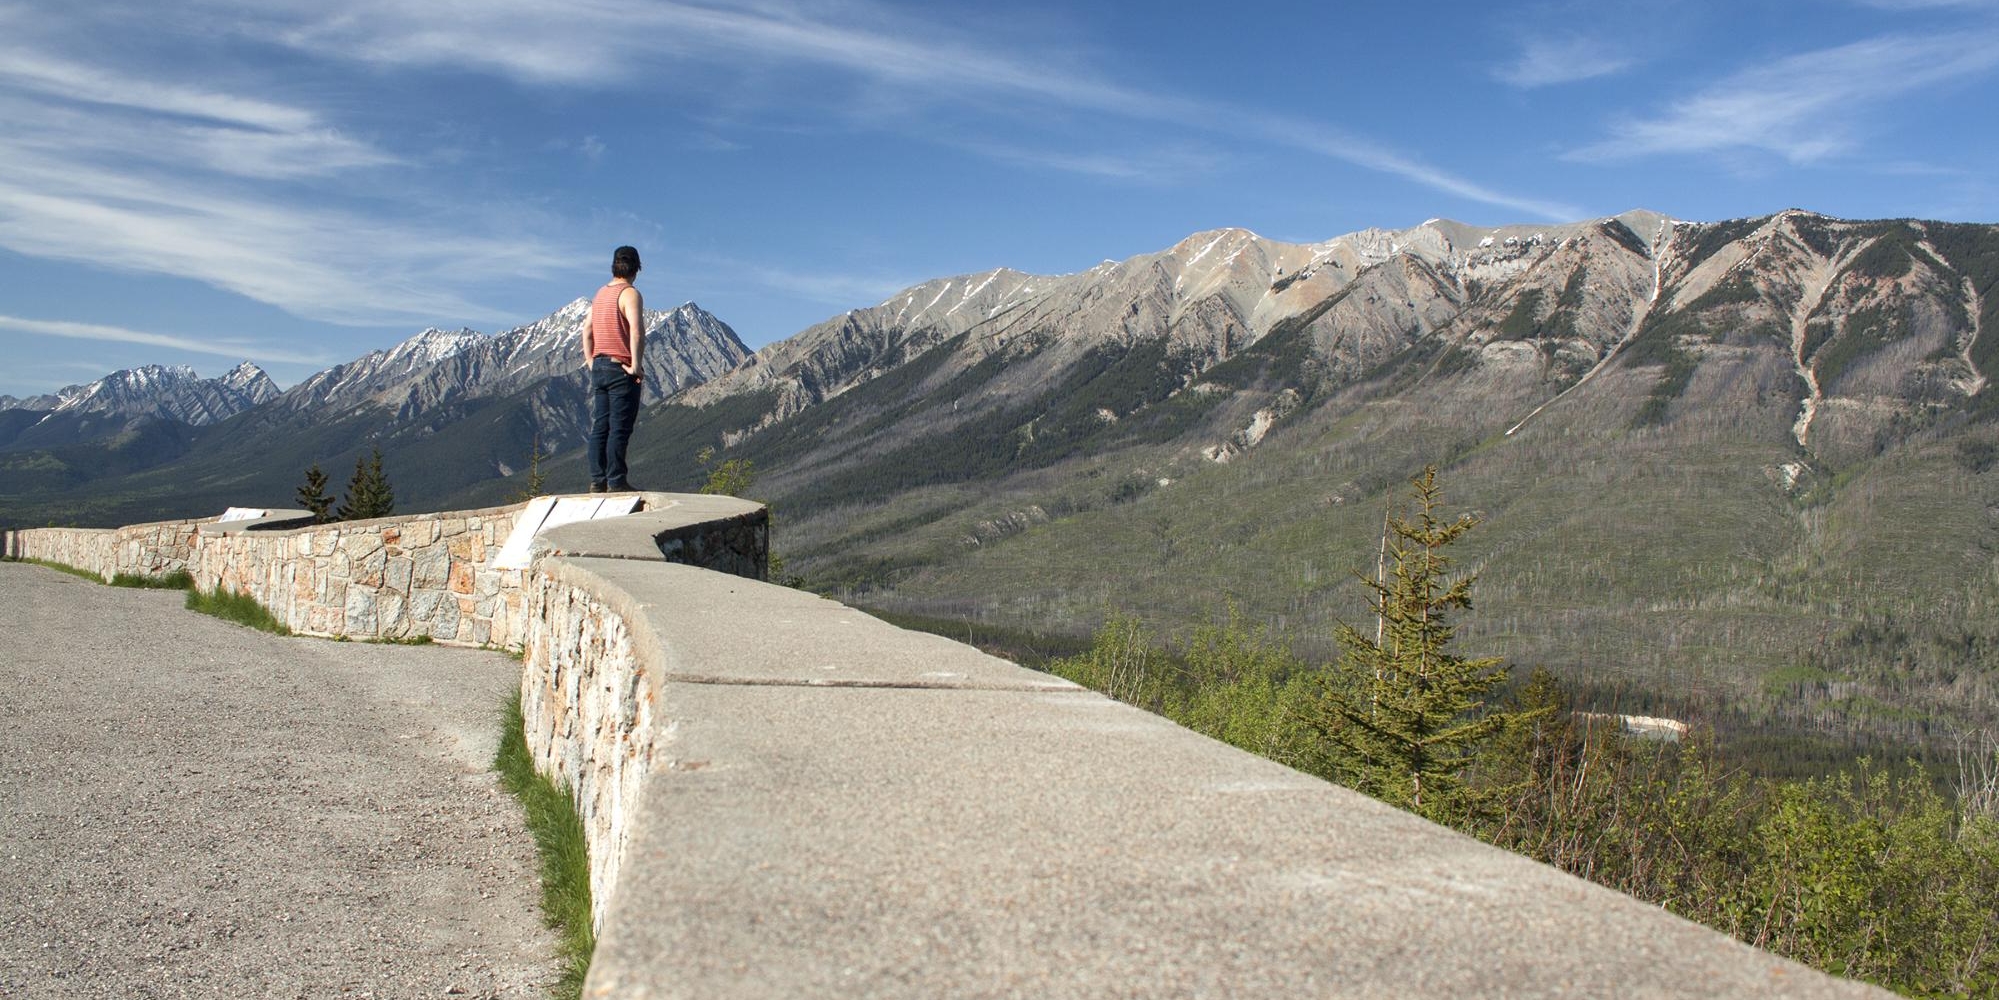 A man stands at the edge of a lookout, taking in a rocky mountain range.